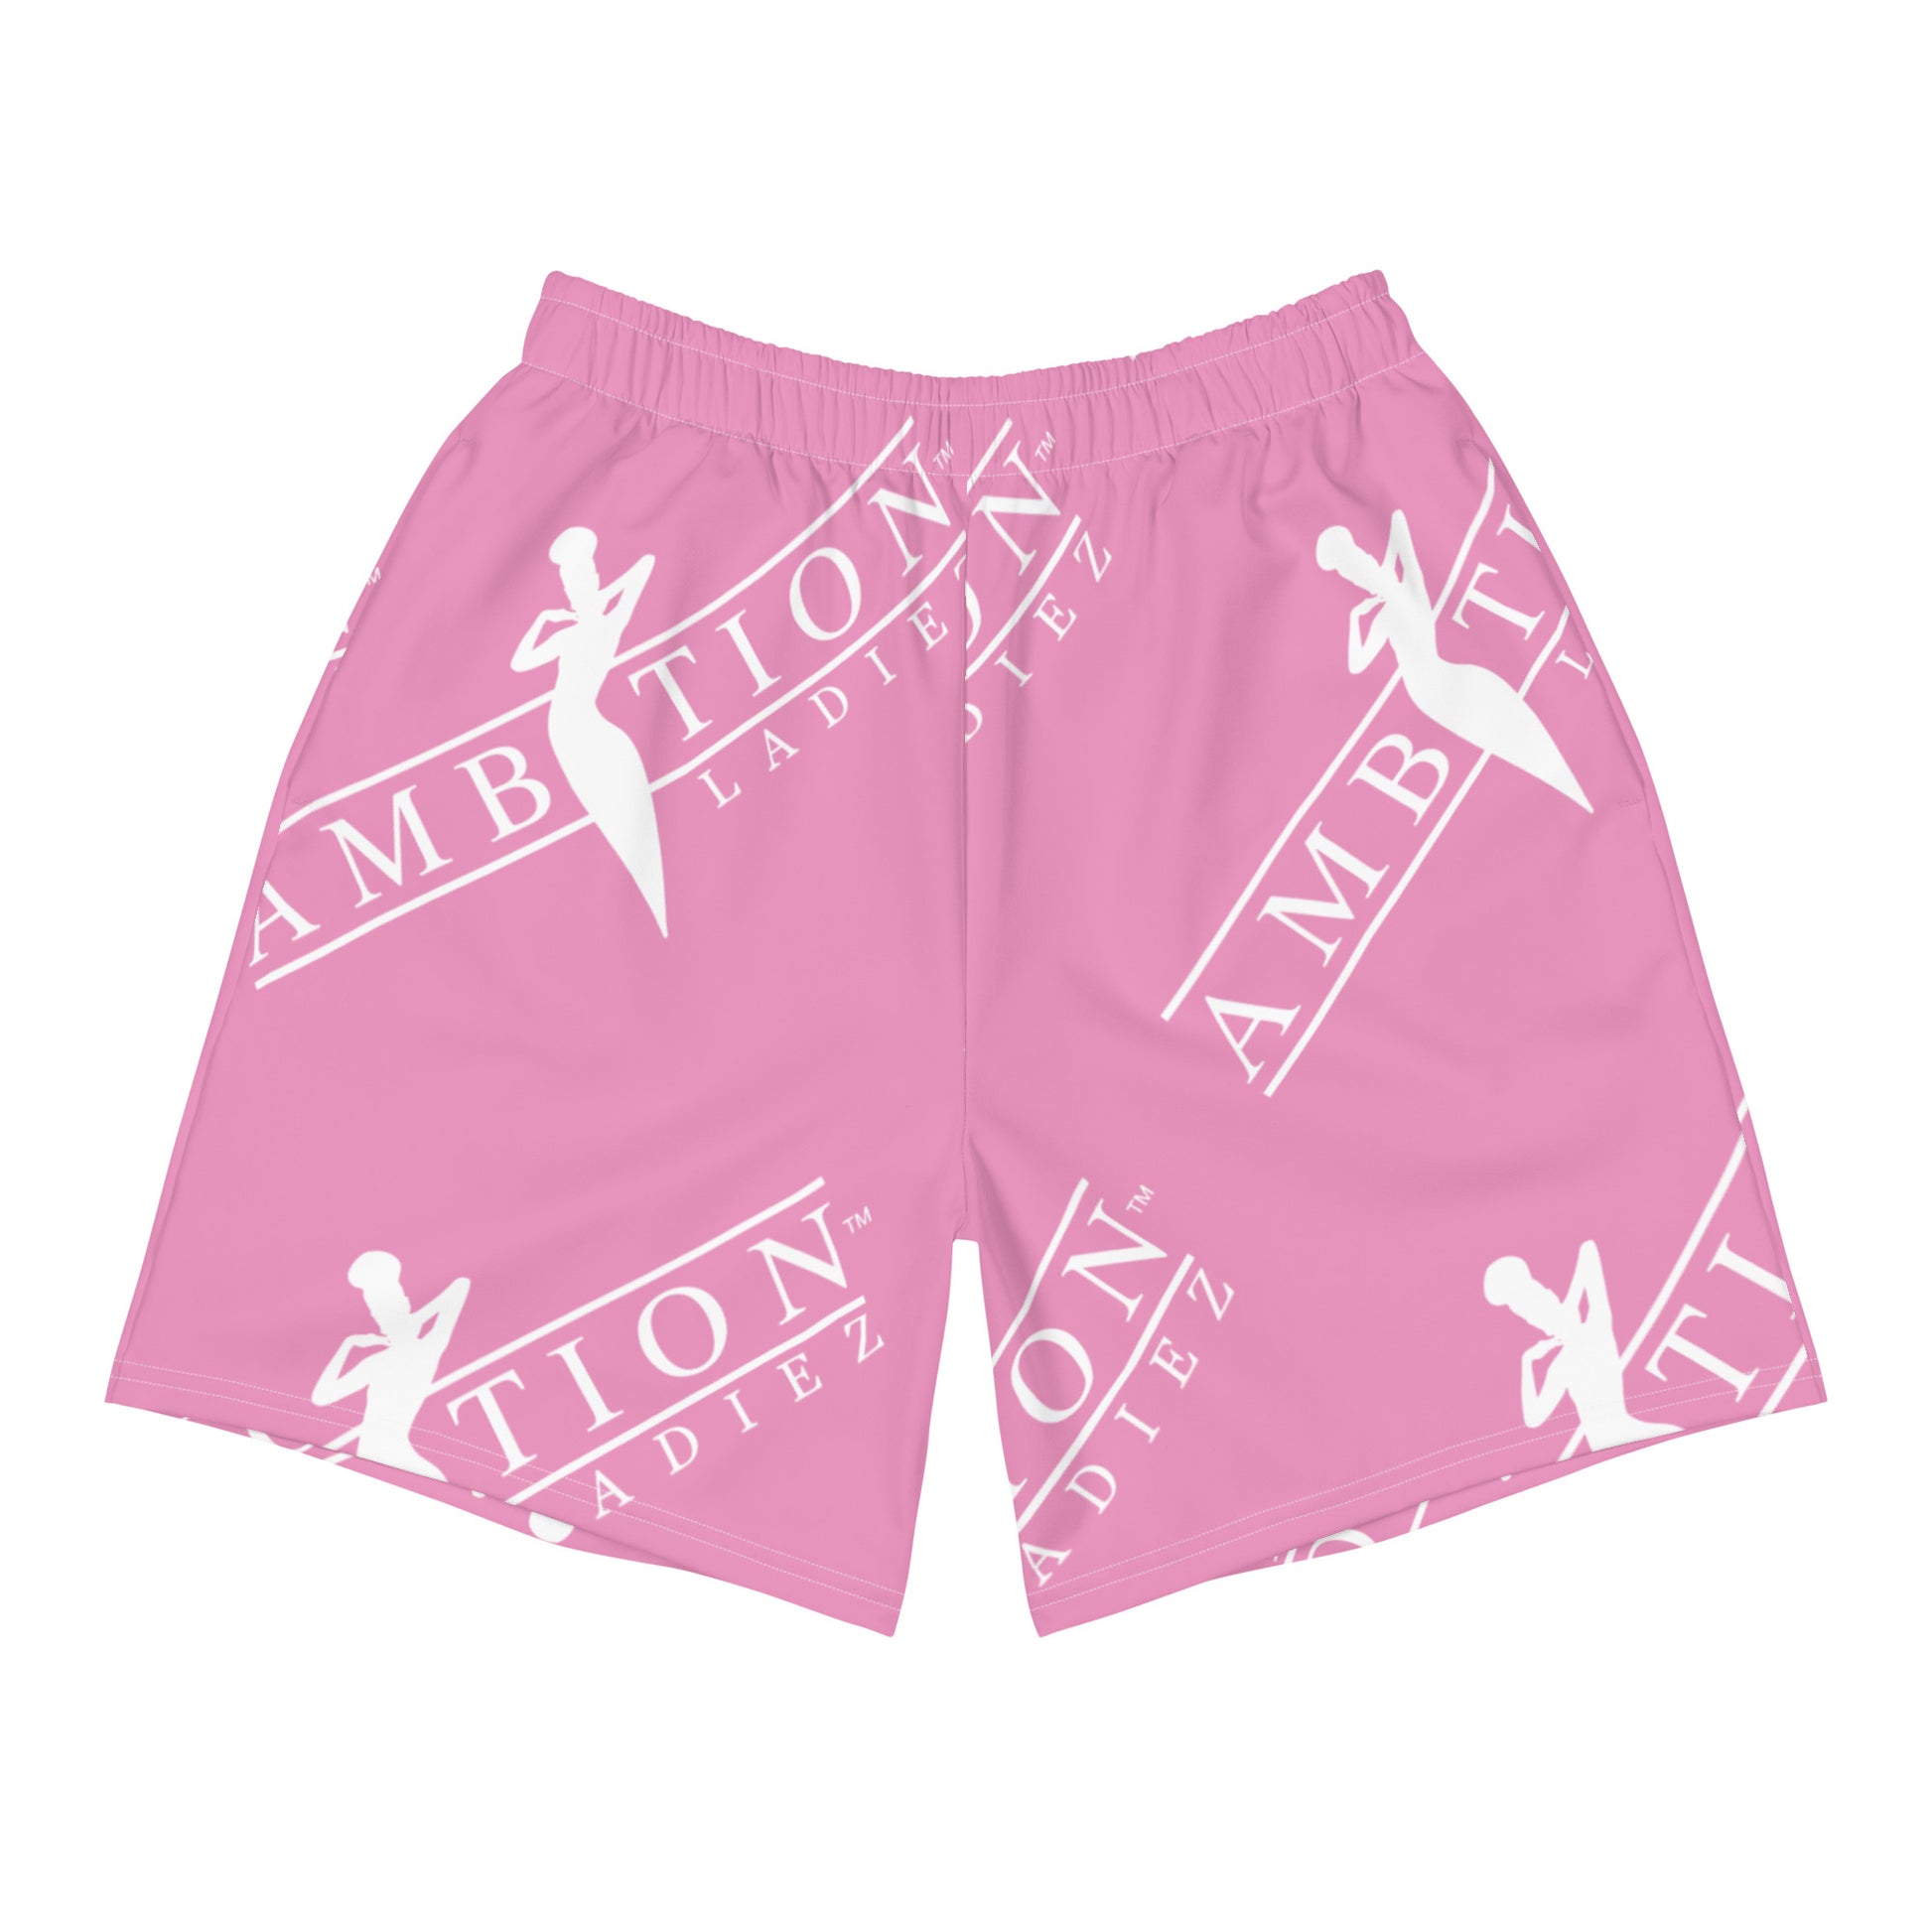 Men's Sports Shorts in pink color